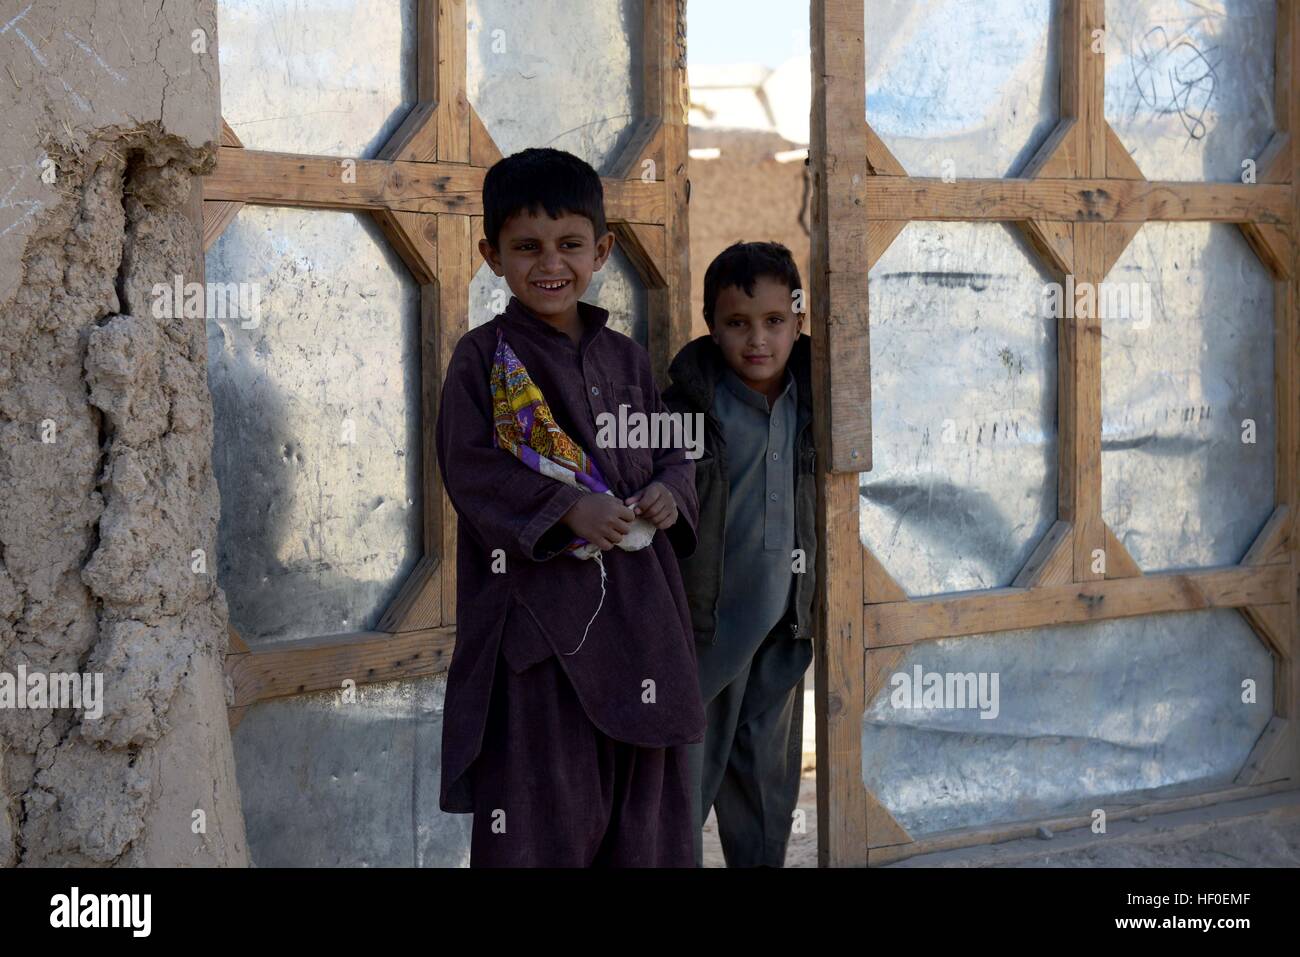 Qalat, Afghanistan's Zabul province. 26th Dec, 2016. Afghan displaced children stand outside their tents in Qalat city, capital of southern Afghanistan's Zabul province, Dec. 26, 2016. More than one million people have to flee their home due to conflicts in the country, according to officials. © Sanaullah Seiam/Xinhua/Alamy Live News Stock Photo